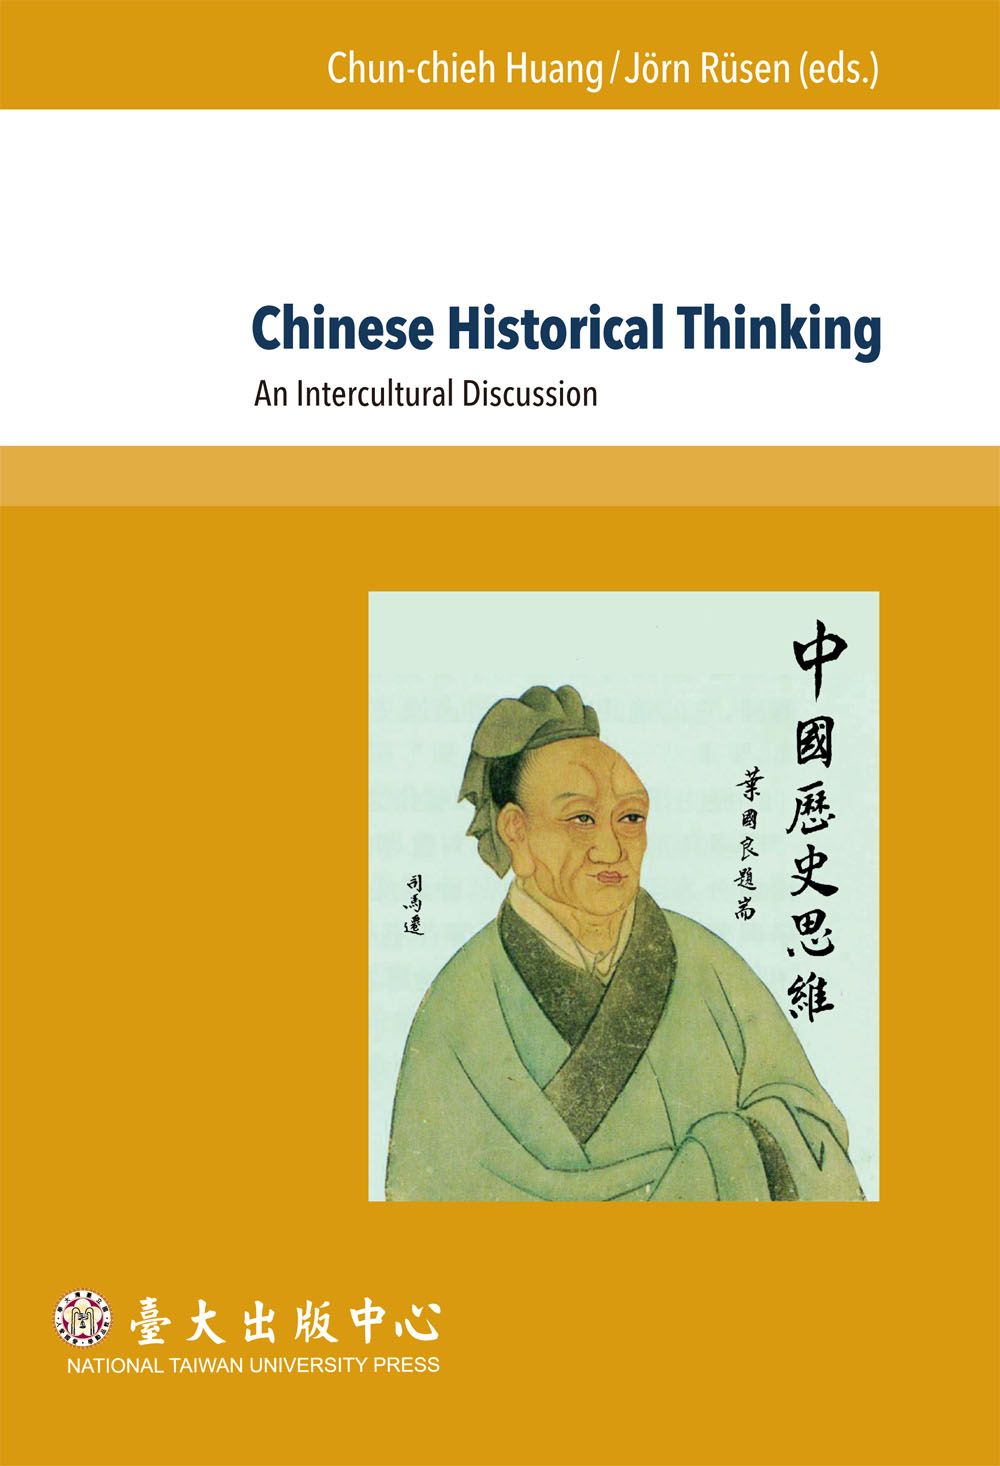 Chinese Historical Thinking: An Intercultural Discussion